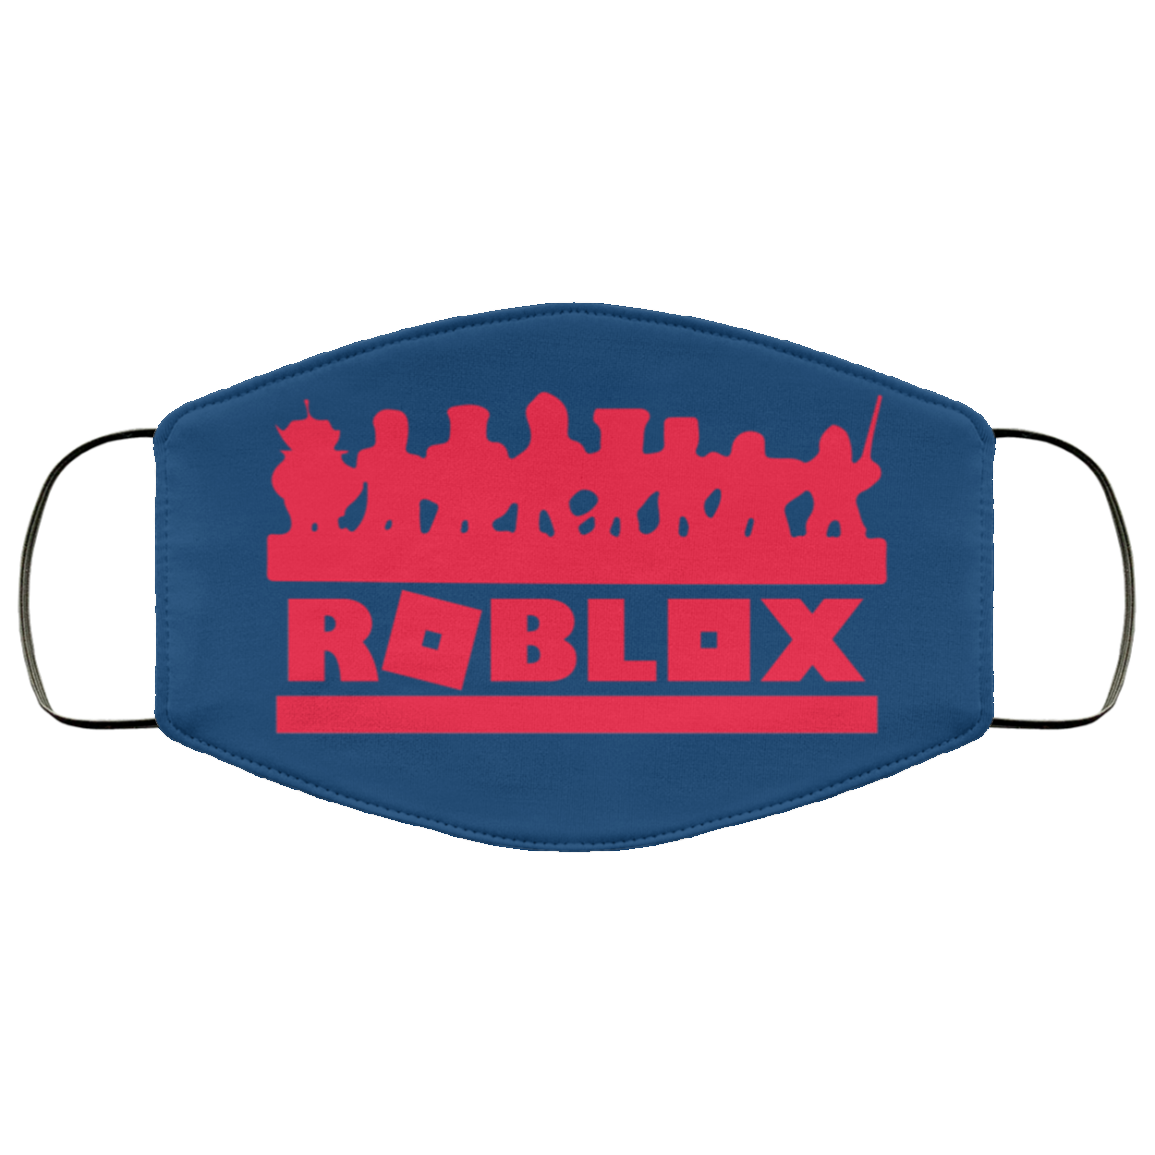 Roblox Face Mask Face Mask Washable Reusable